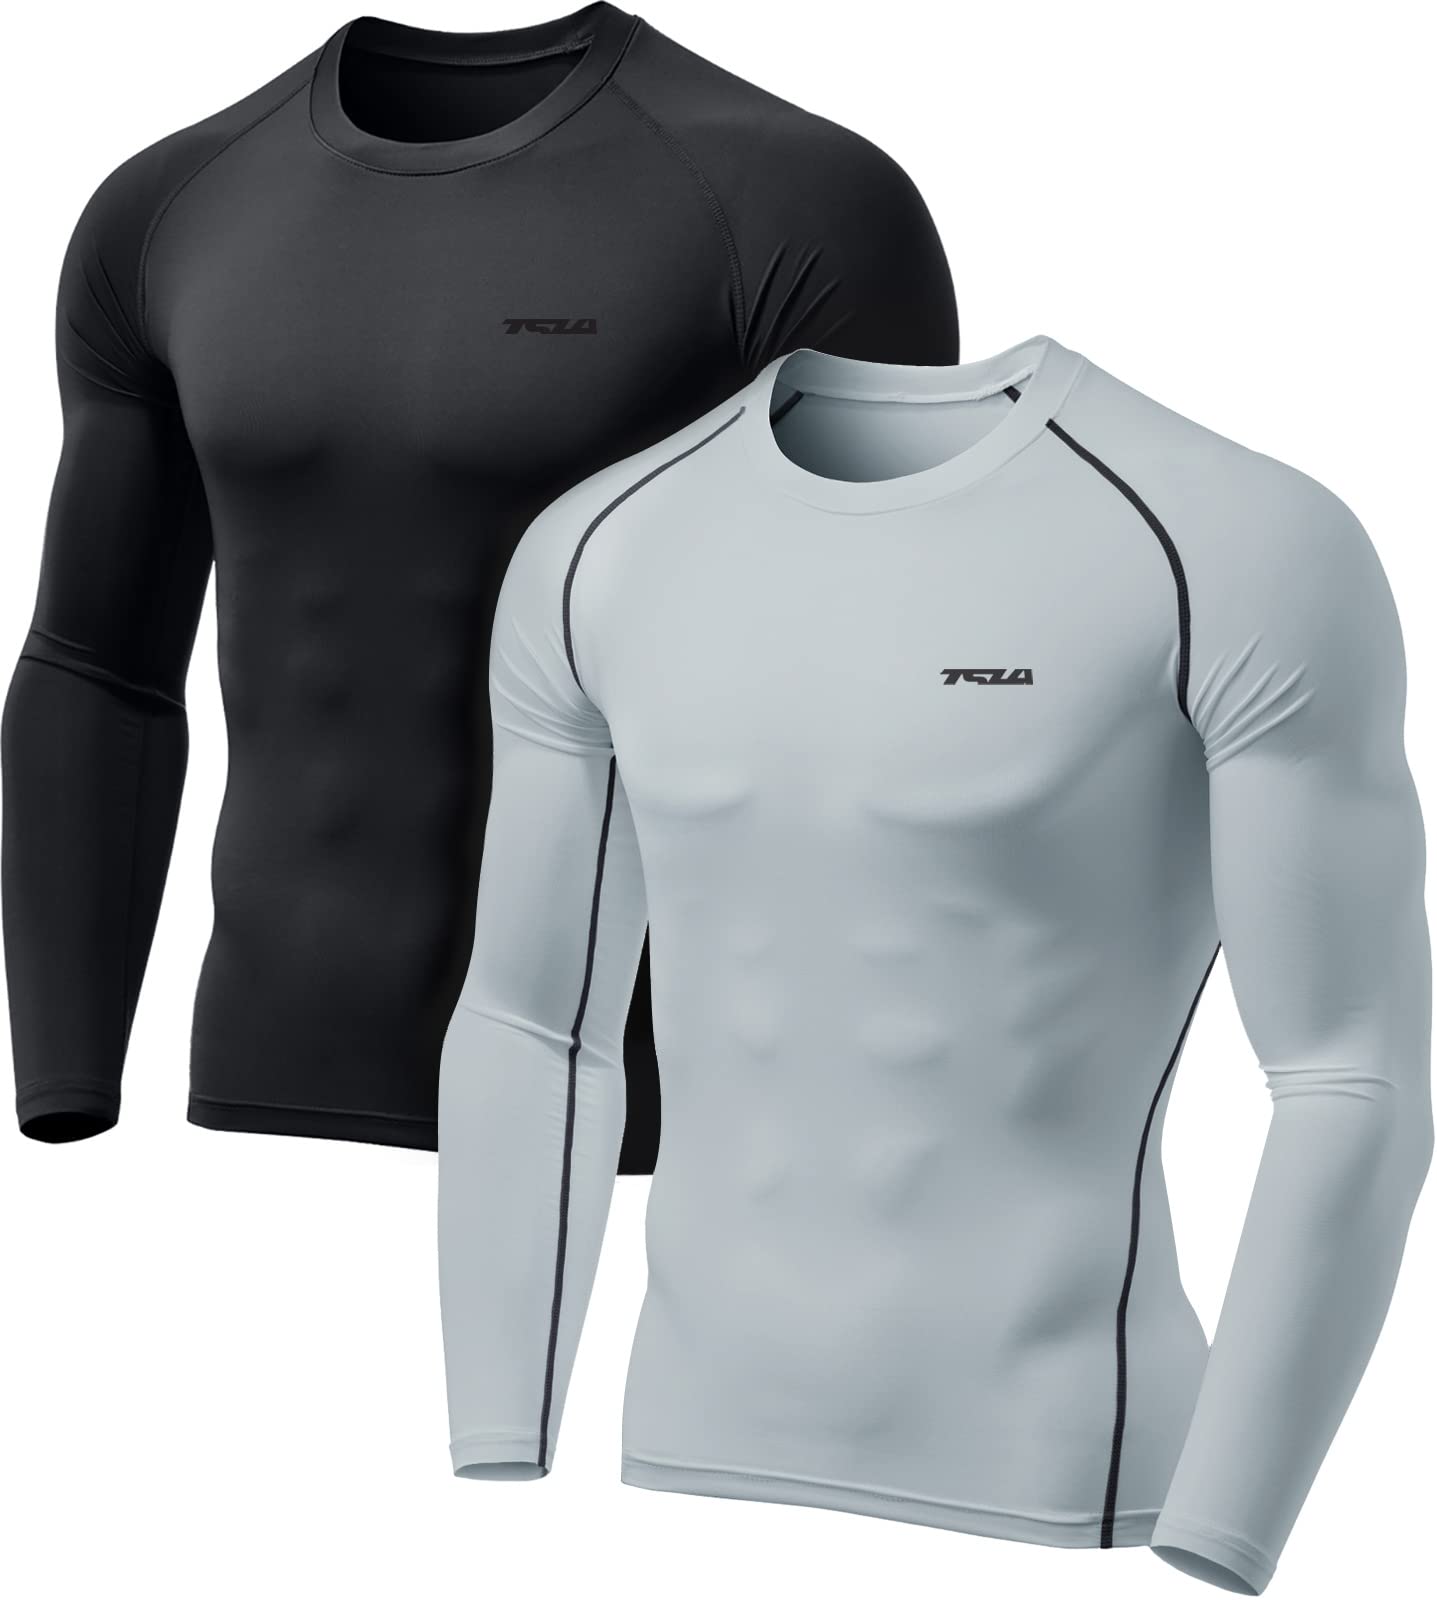 TSLA Mens Thermal Long Sleeve compression Shirts, Athletic Base Layer Top,  Winter gear Running T-Shirt, Heat core 2pack BlackLight grey, XX-Large  Walmart Canada